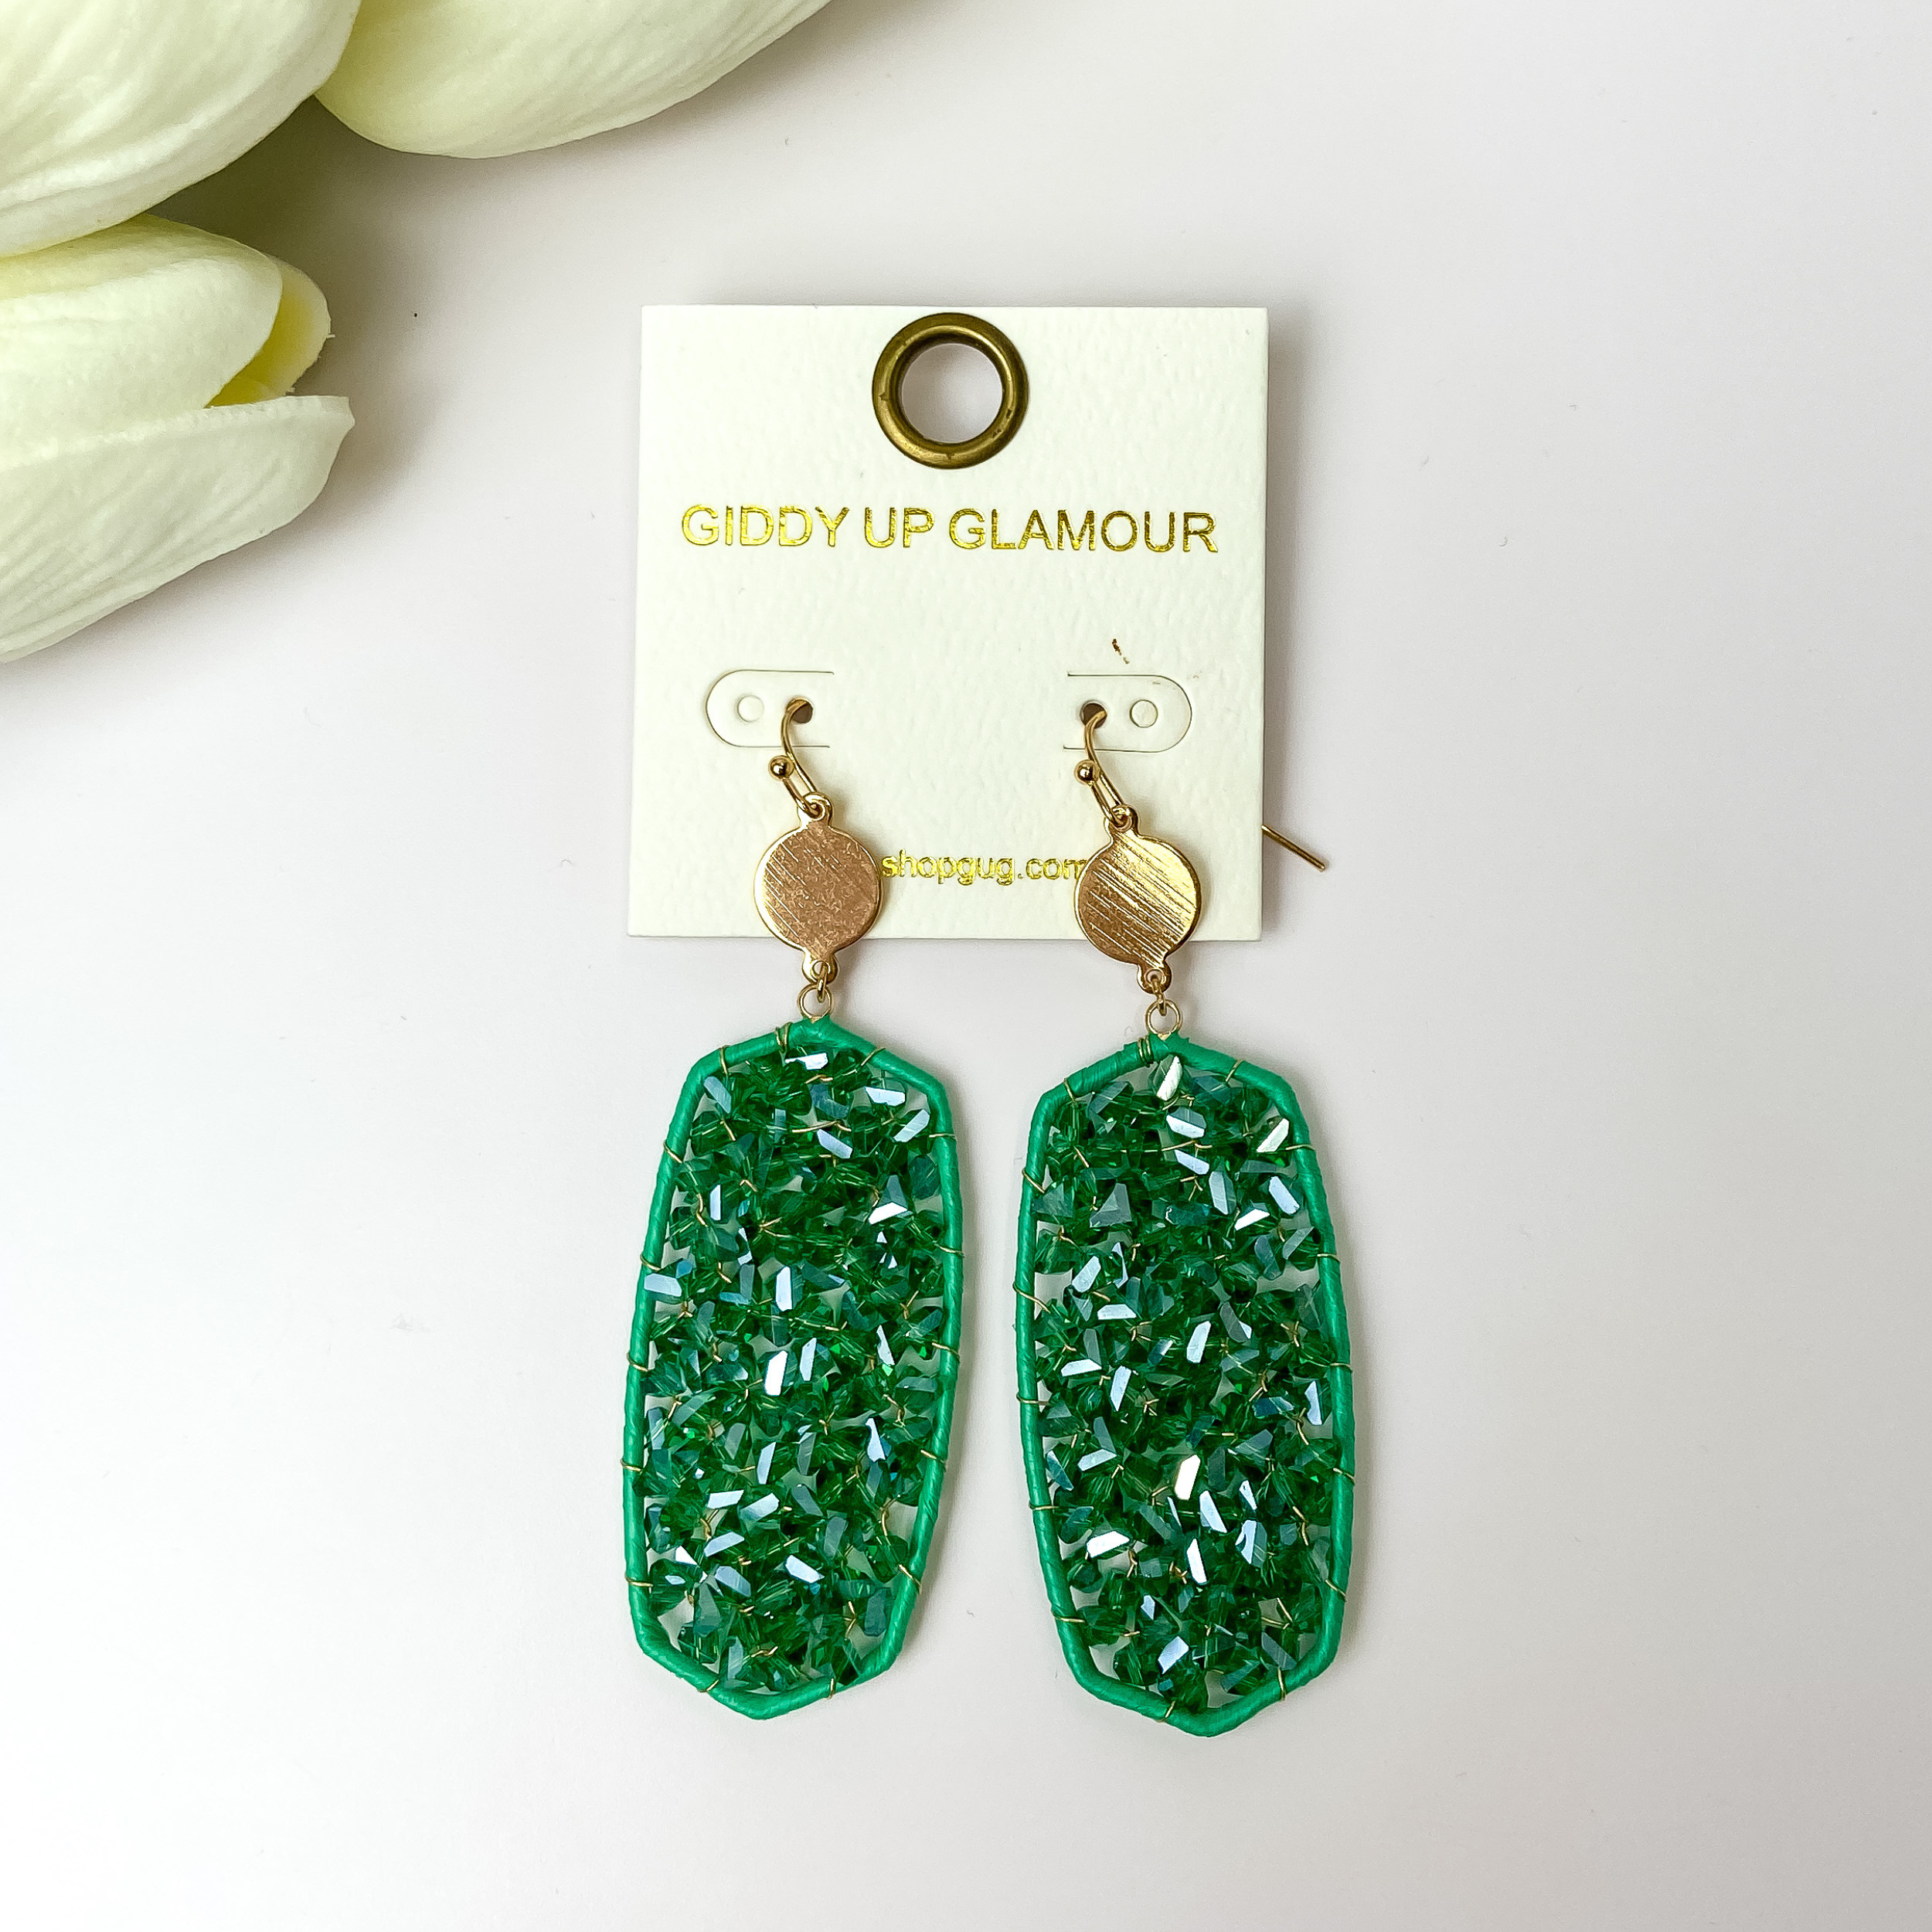 Emerald green crystal earrings with gold tone accents on a white background with white flowers in the corner.